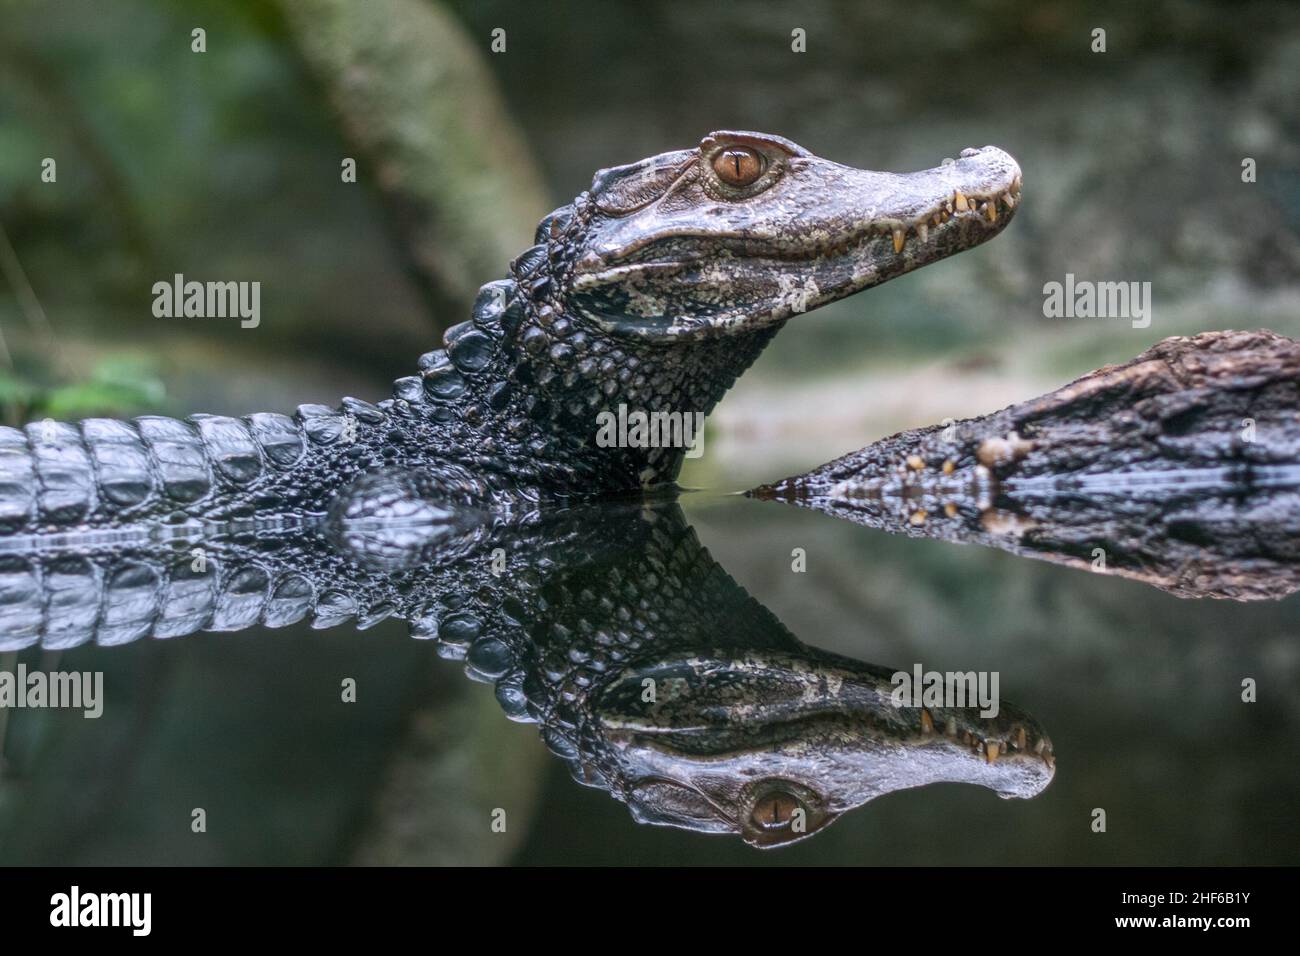 Reflection of The spectacled caiman - Caiman crocodilus in water. Stock Photo